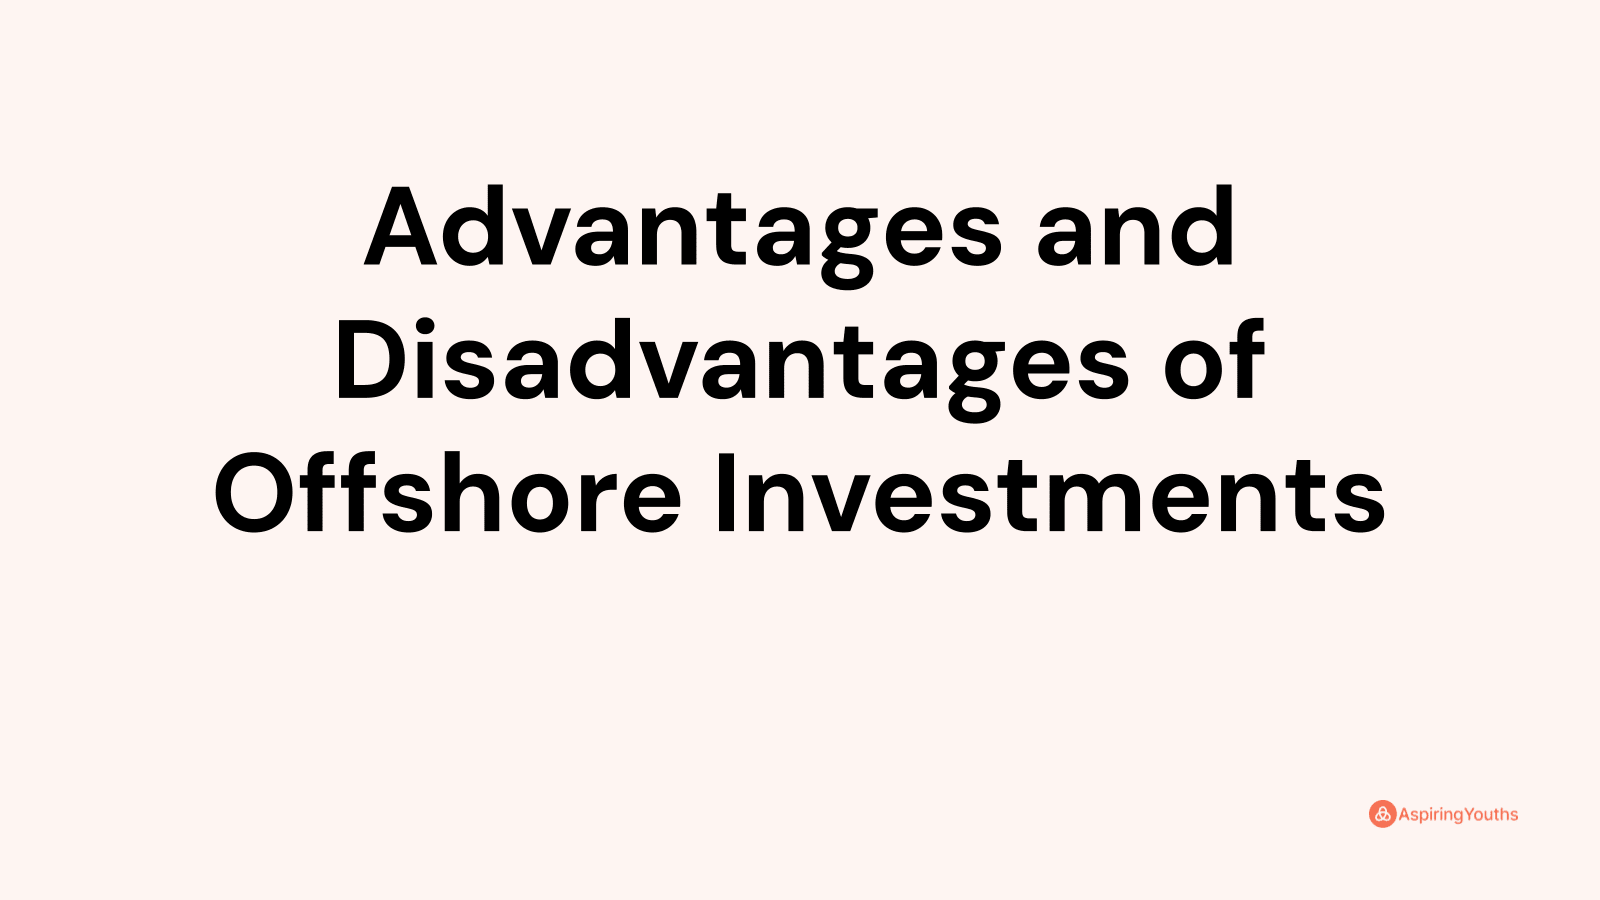 Advantages and disadvantages of Offshore Investments